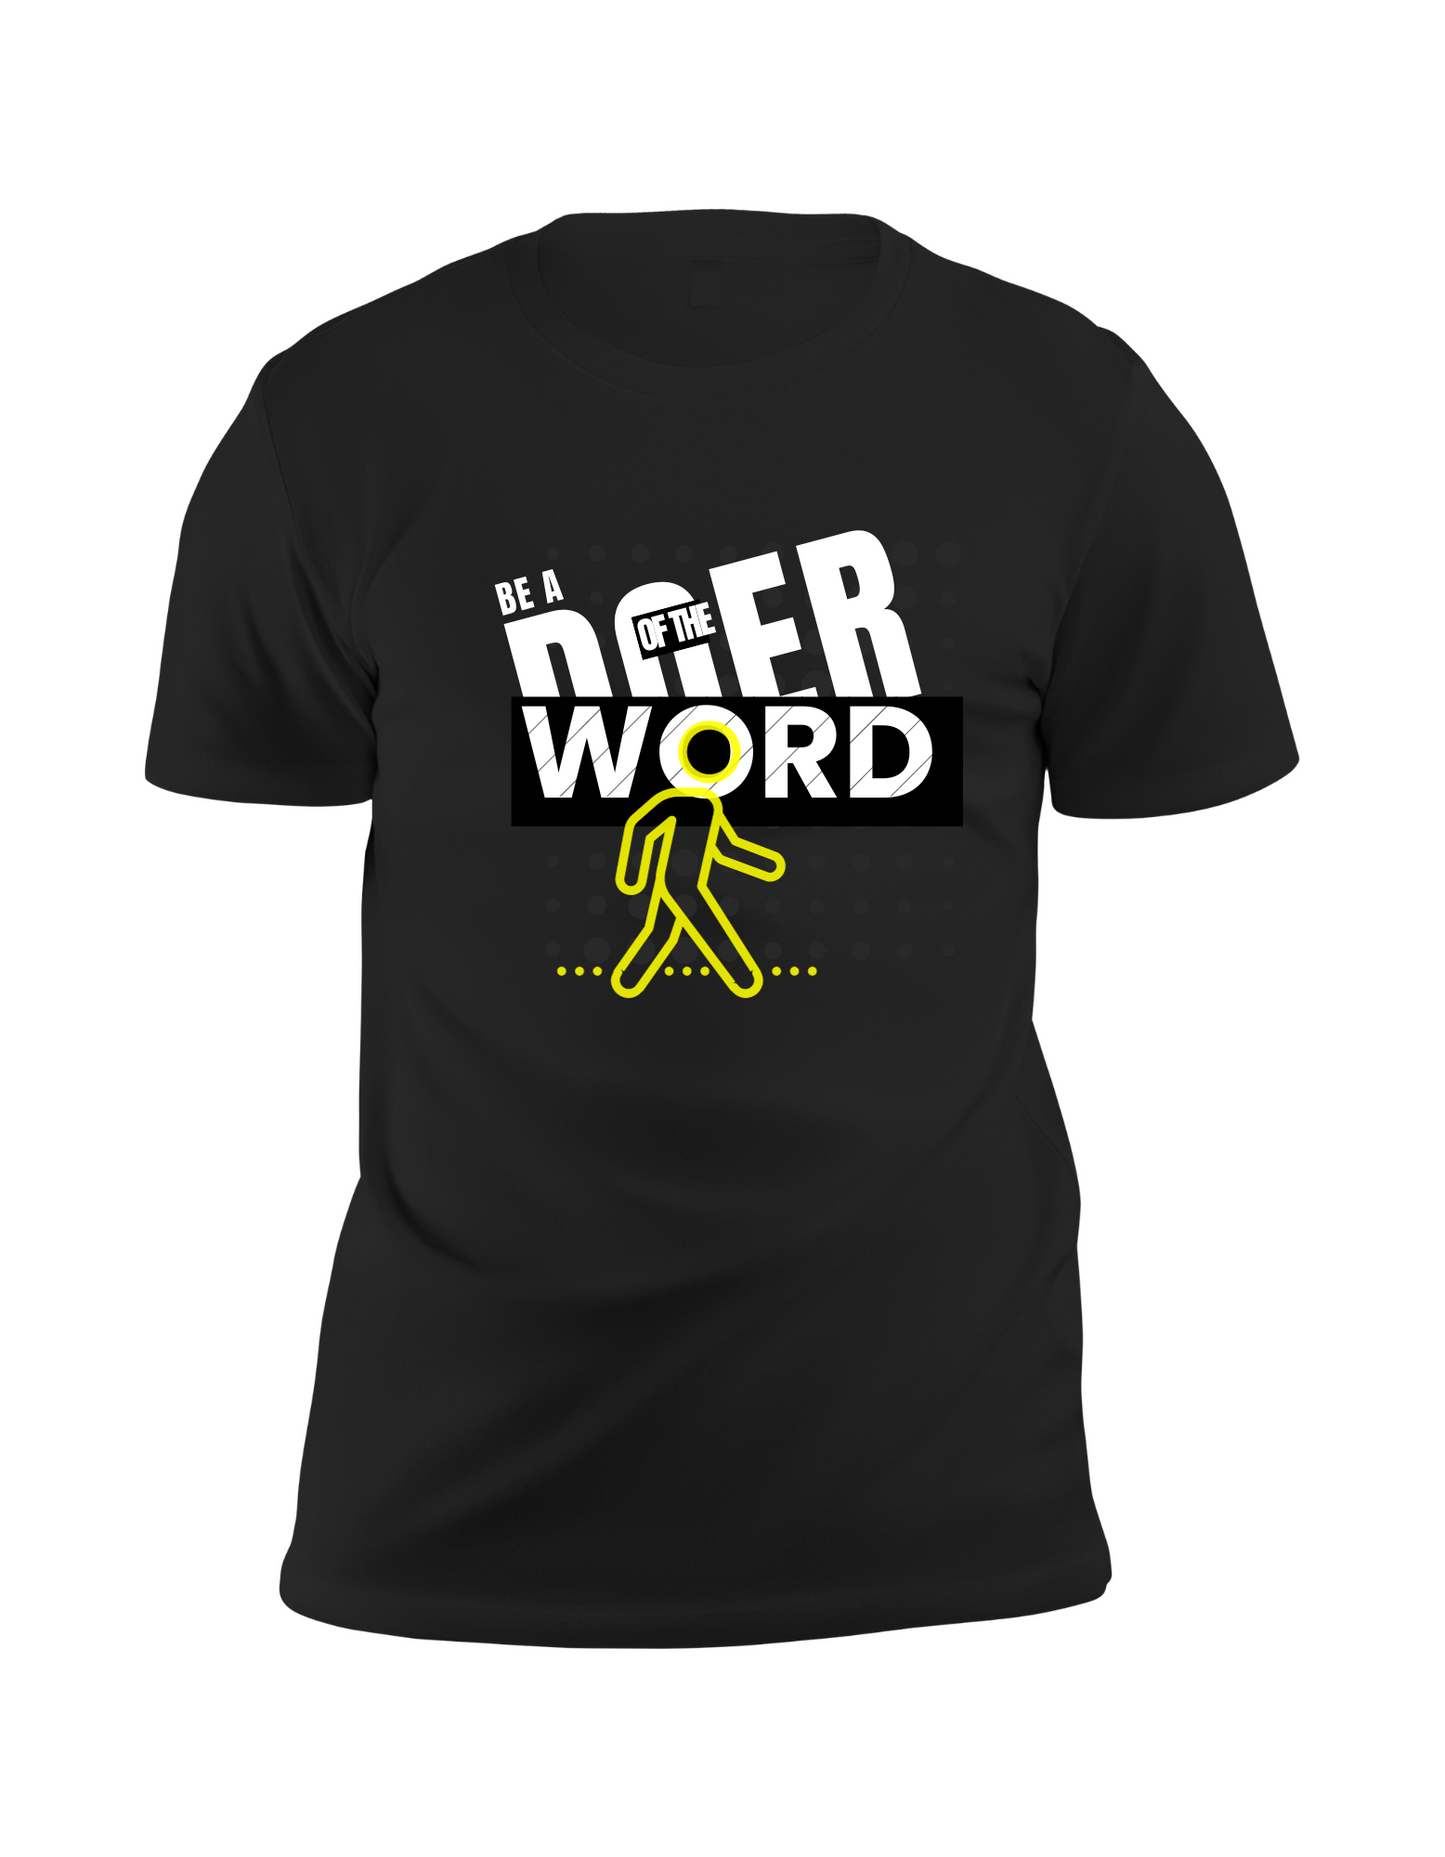 BE A DOER OF THE WORD TEE